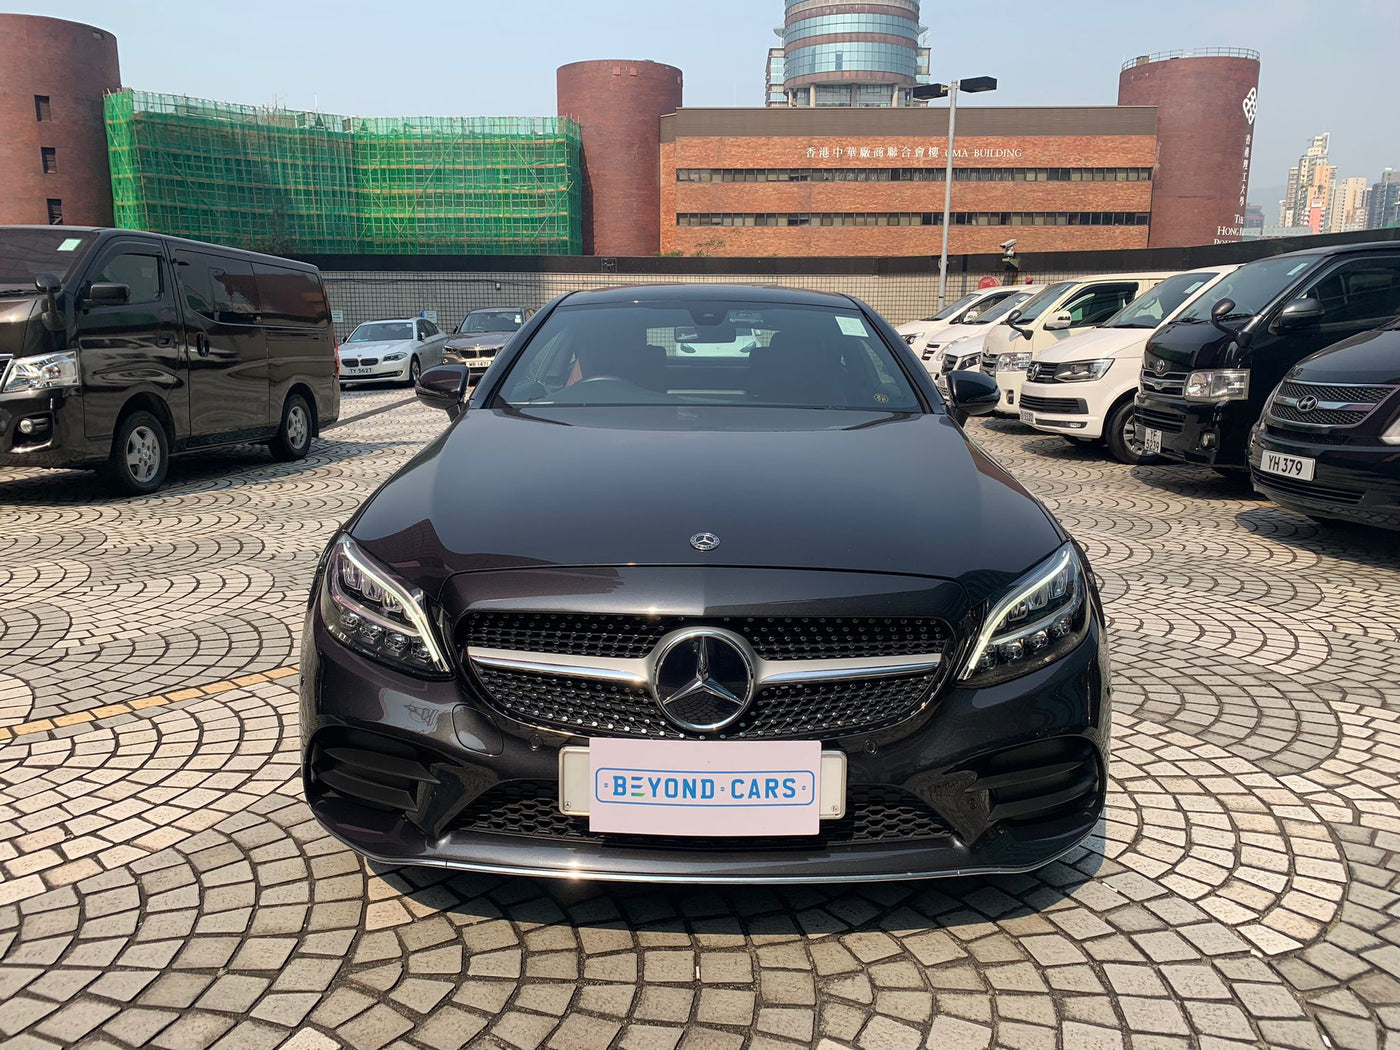 MERCEDES-BENZ C200 Coupe AMG 2018